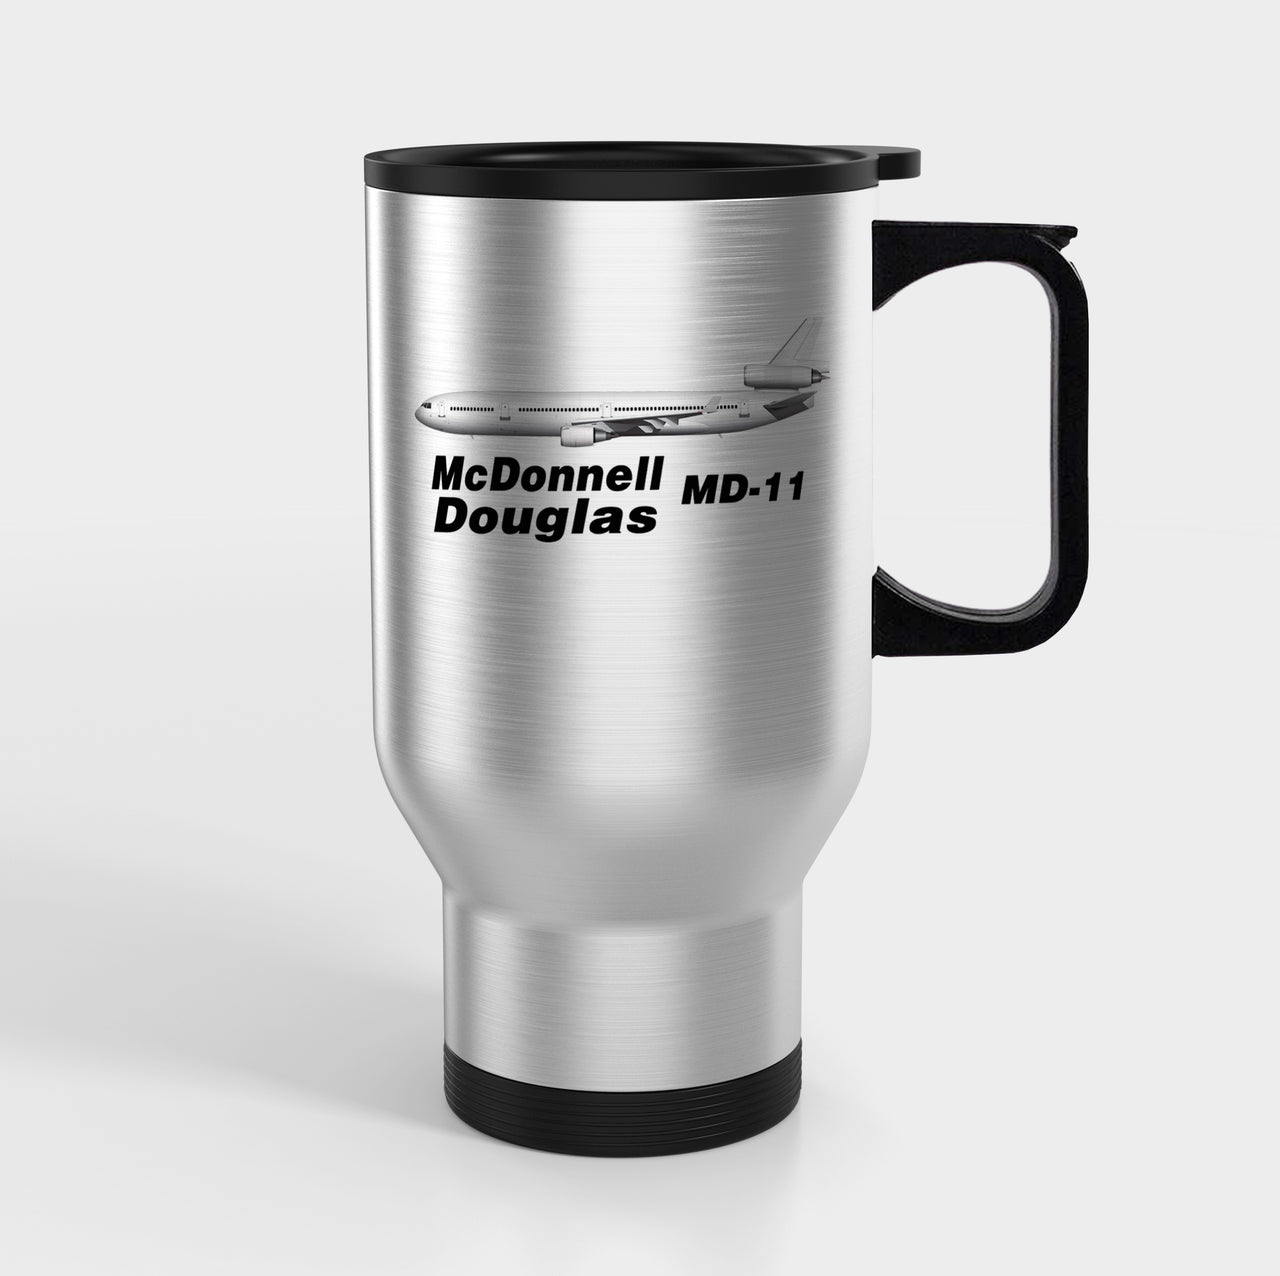 The McDonnell Douglas MD-11 Designed Travel Mugs (With Holder)